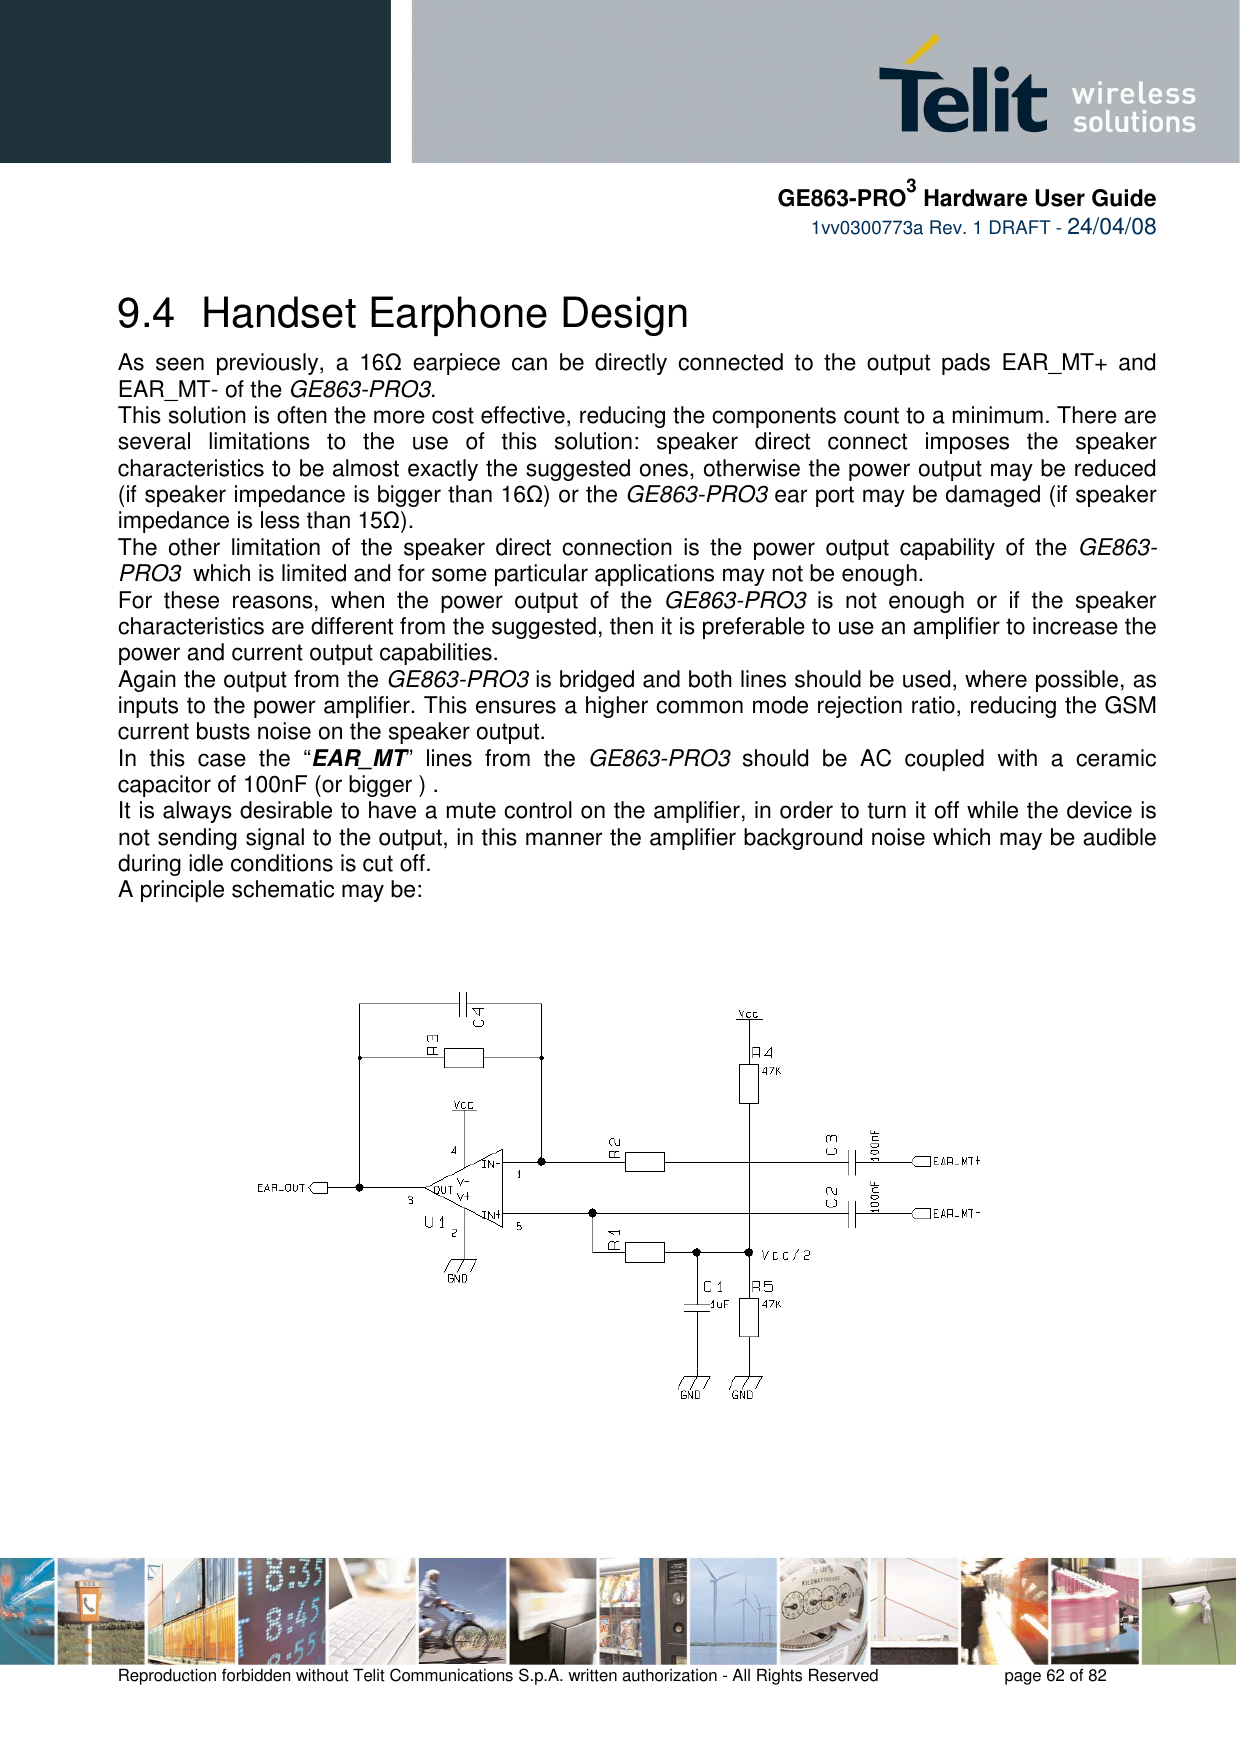     GE863-PRO3 Hardware User Guide  1vv0300773a Rev. 1 DRAFT - 24/04/08    Reproduction forbidden without Telit Communications S.p.A. written authorization - All Rights Reserved    page 62 of 82  9.4  Handset Earphone Design As  seen  previously,  a  16Ω  earpiece  can  be  directly  connected  to  the  output  pads  EAR_MT+  and EAR_MT- of the GE863-PRO3. This solution is often the more cost effective, reducing the components count to a minimum. There are several  limitations  to  the  use  of  this  solution:  speaker  direct  connect  imposes  the  speaker characteristics to be almost exactly the suggested ones, otherwise the power output may be reduced (if speaker impedance is bigger than 16Ω) or the GE863-PRO3 ear port may be damaged (if speaker impedance is less than 15Ω). The  other  limitation  of  the  speaker  direct  connection  is  the  power  output  capability  of  the  GE863-PRO3  which is limited and for some particular applications may not be enough. For  these  reasons,  when  the  power  output  of  the  GE863-PRO3  is  not  enough  or  if  the  speaker characteristics are different from the suggested, then it is preferable to use an amplifier to increase the power and current output capabilities.  Again the output from the GE863-PRO3 is bridged and both lines should be used, where possible, as inputs to the power amplifier. This ensures a higher common mode rejection ratio, reducing the GSM current busts noise on the speaker output. In  this  case  the  “EAR_MT”  lines  from  the  GE863-PRO3  should  be  AC  coupled  with  a  ceramic capacitor of 100nF (or bigger ) . It is always desirable to have a mute control on the amplifier, in order to turn it off while the device is not sending signal to the output, in this manner the amplifier background noise which may be audible during idle conditions is cut off. A principle schematic may be:  